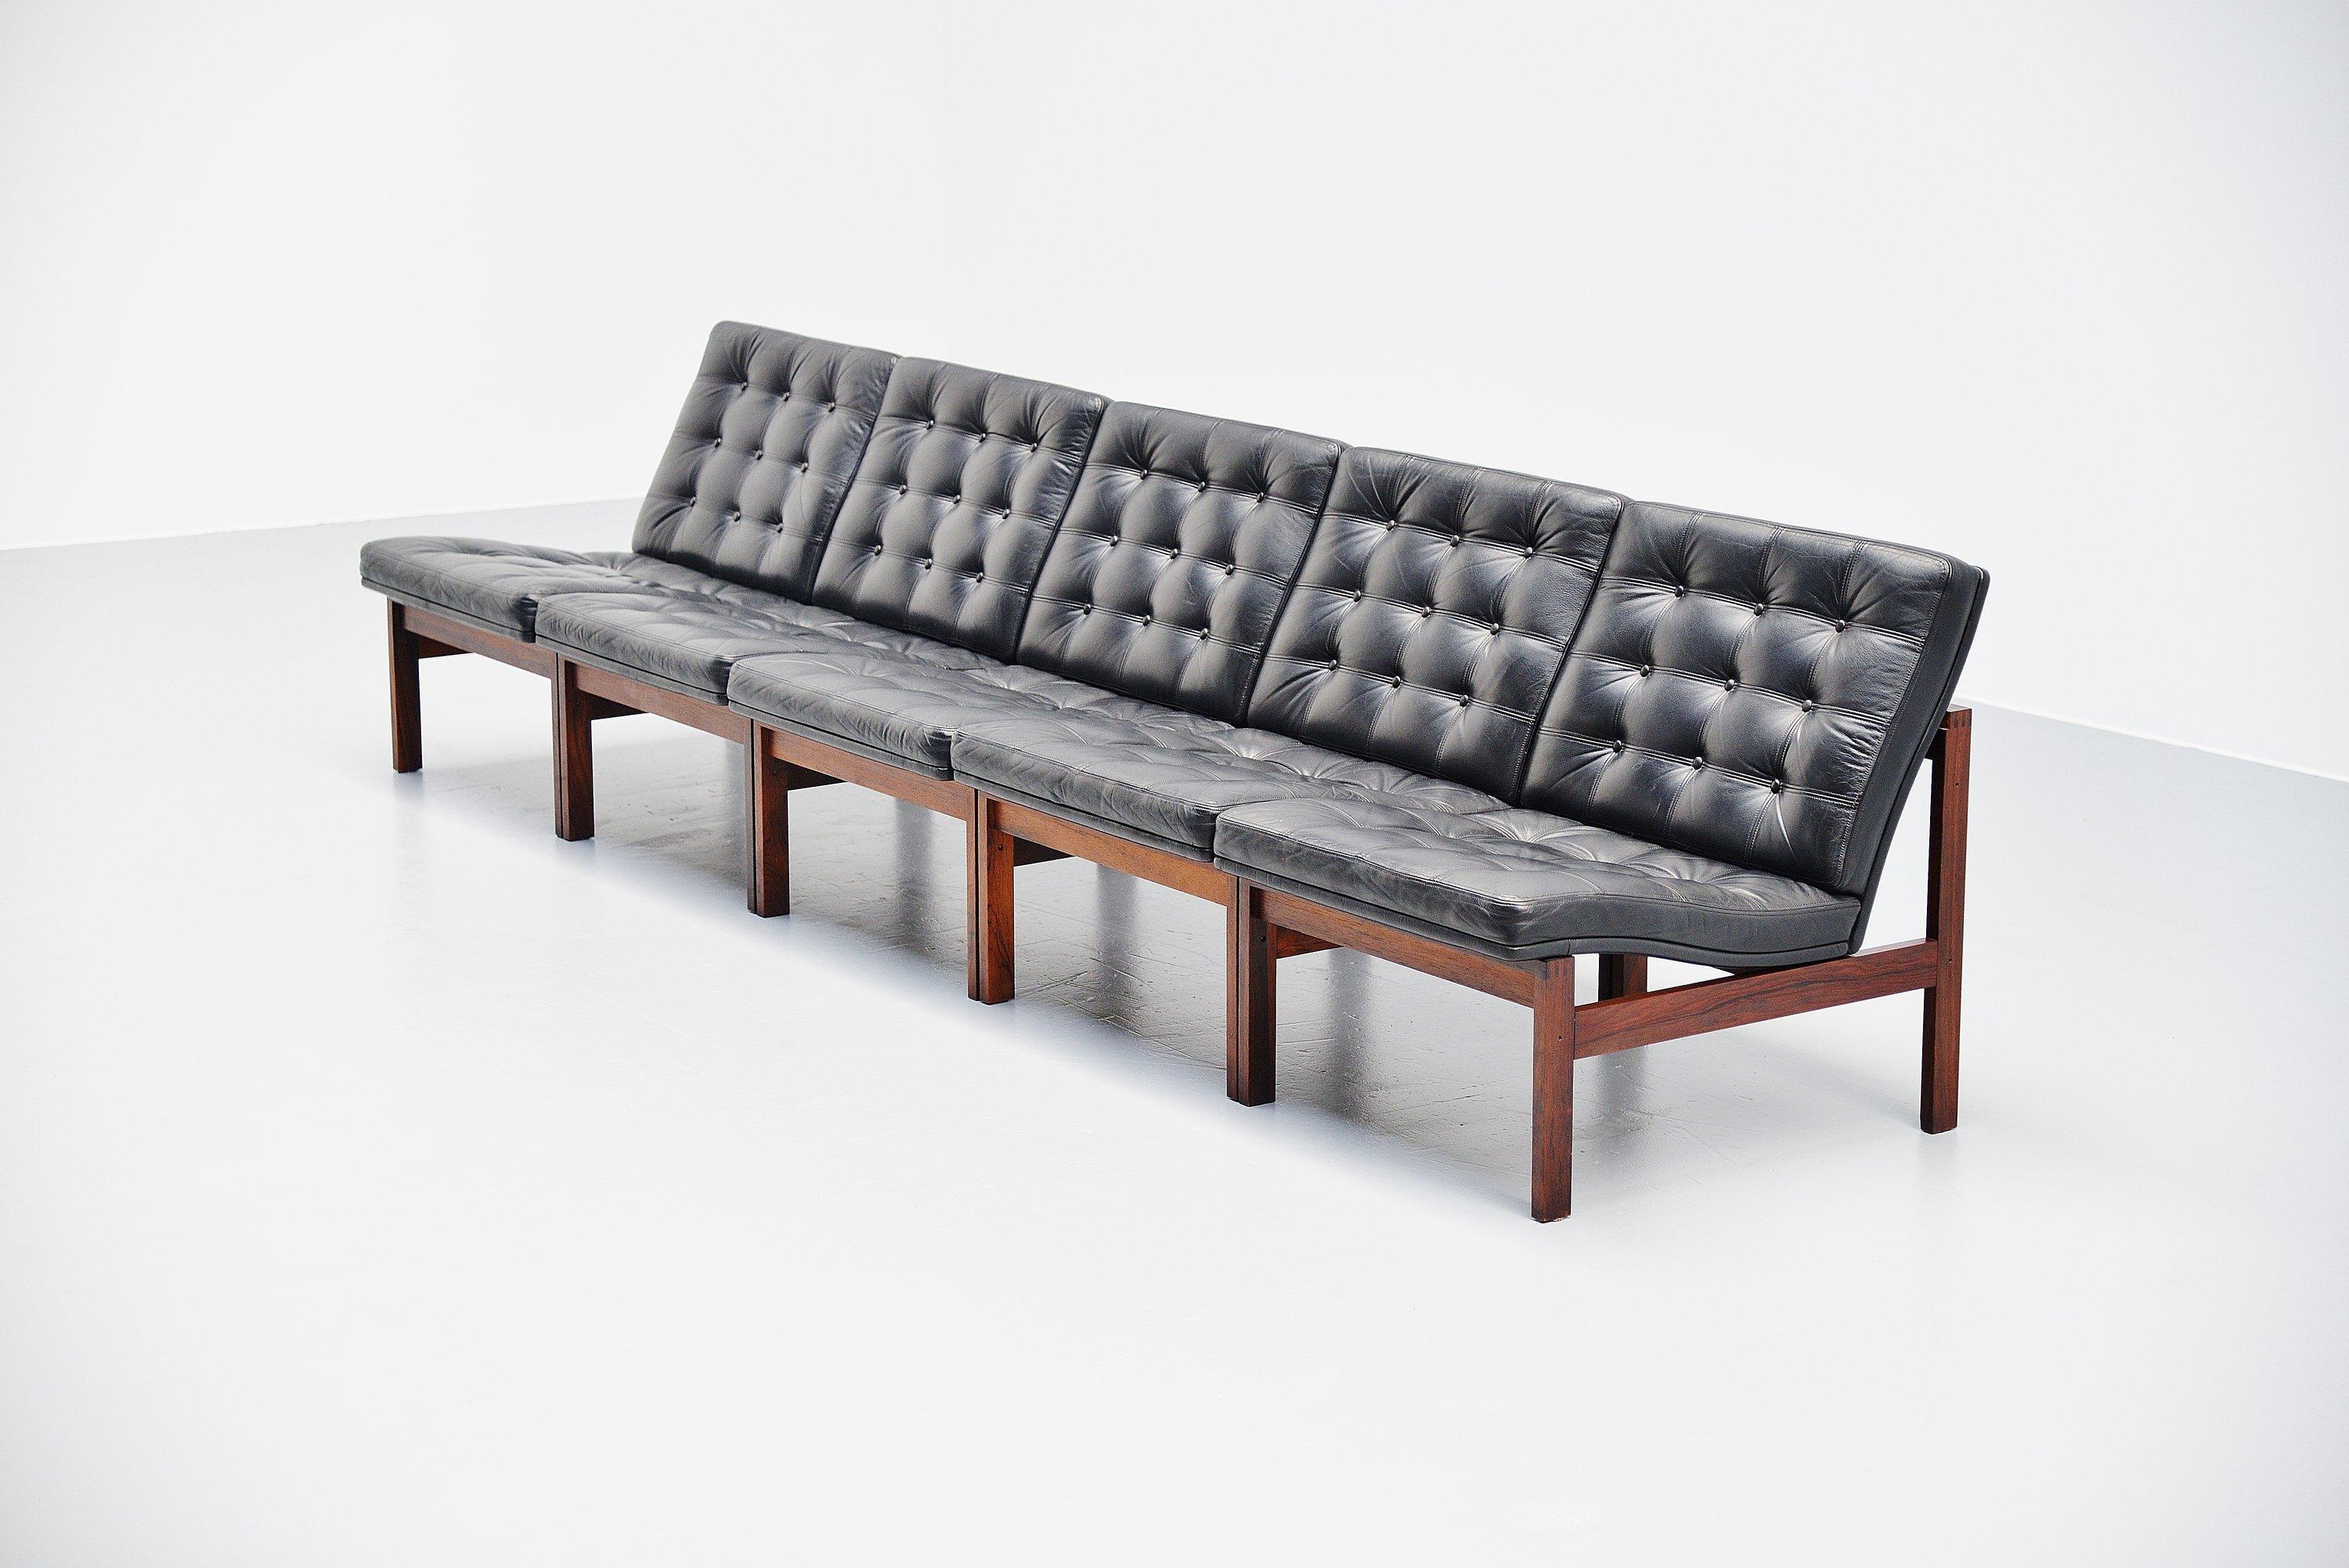 Moduline sofa designed by designer duo Ole Gjerlov Knudsen and Torben Lind. Manufactured by France & Son, Denmark 1962. The sofa has a solid rosewood frame and black leather seats with tufted pattern at the front. The leather is still in great